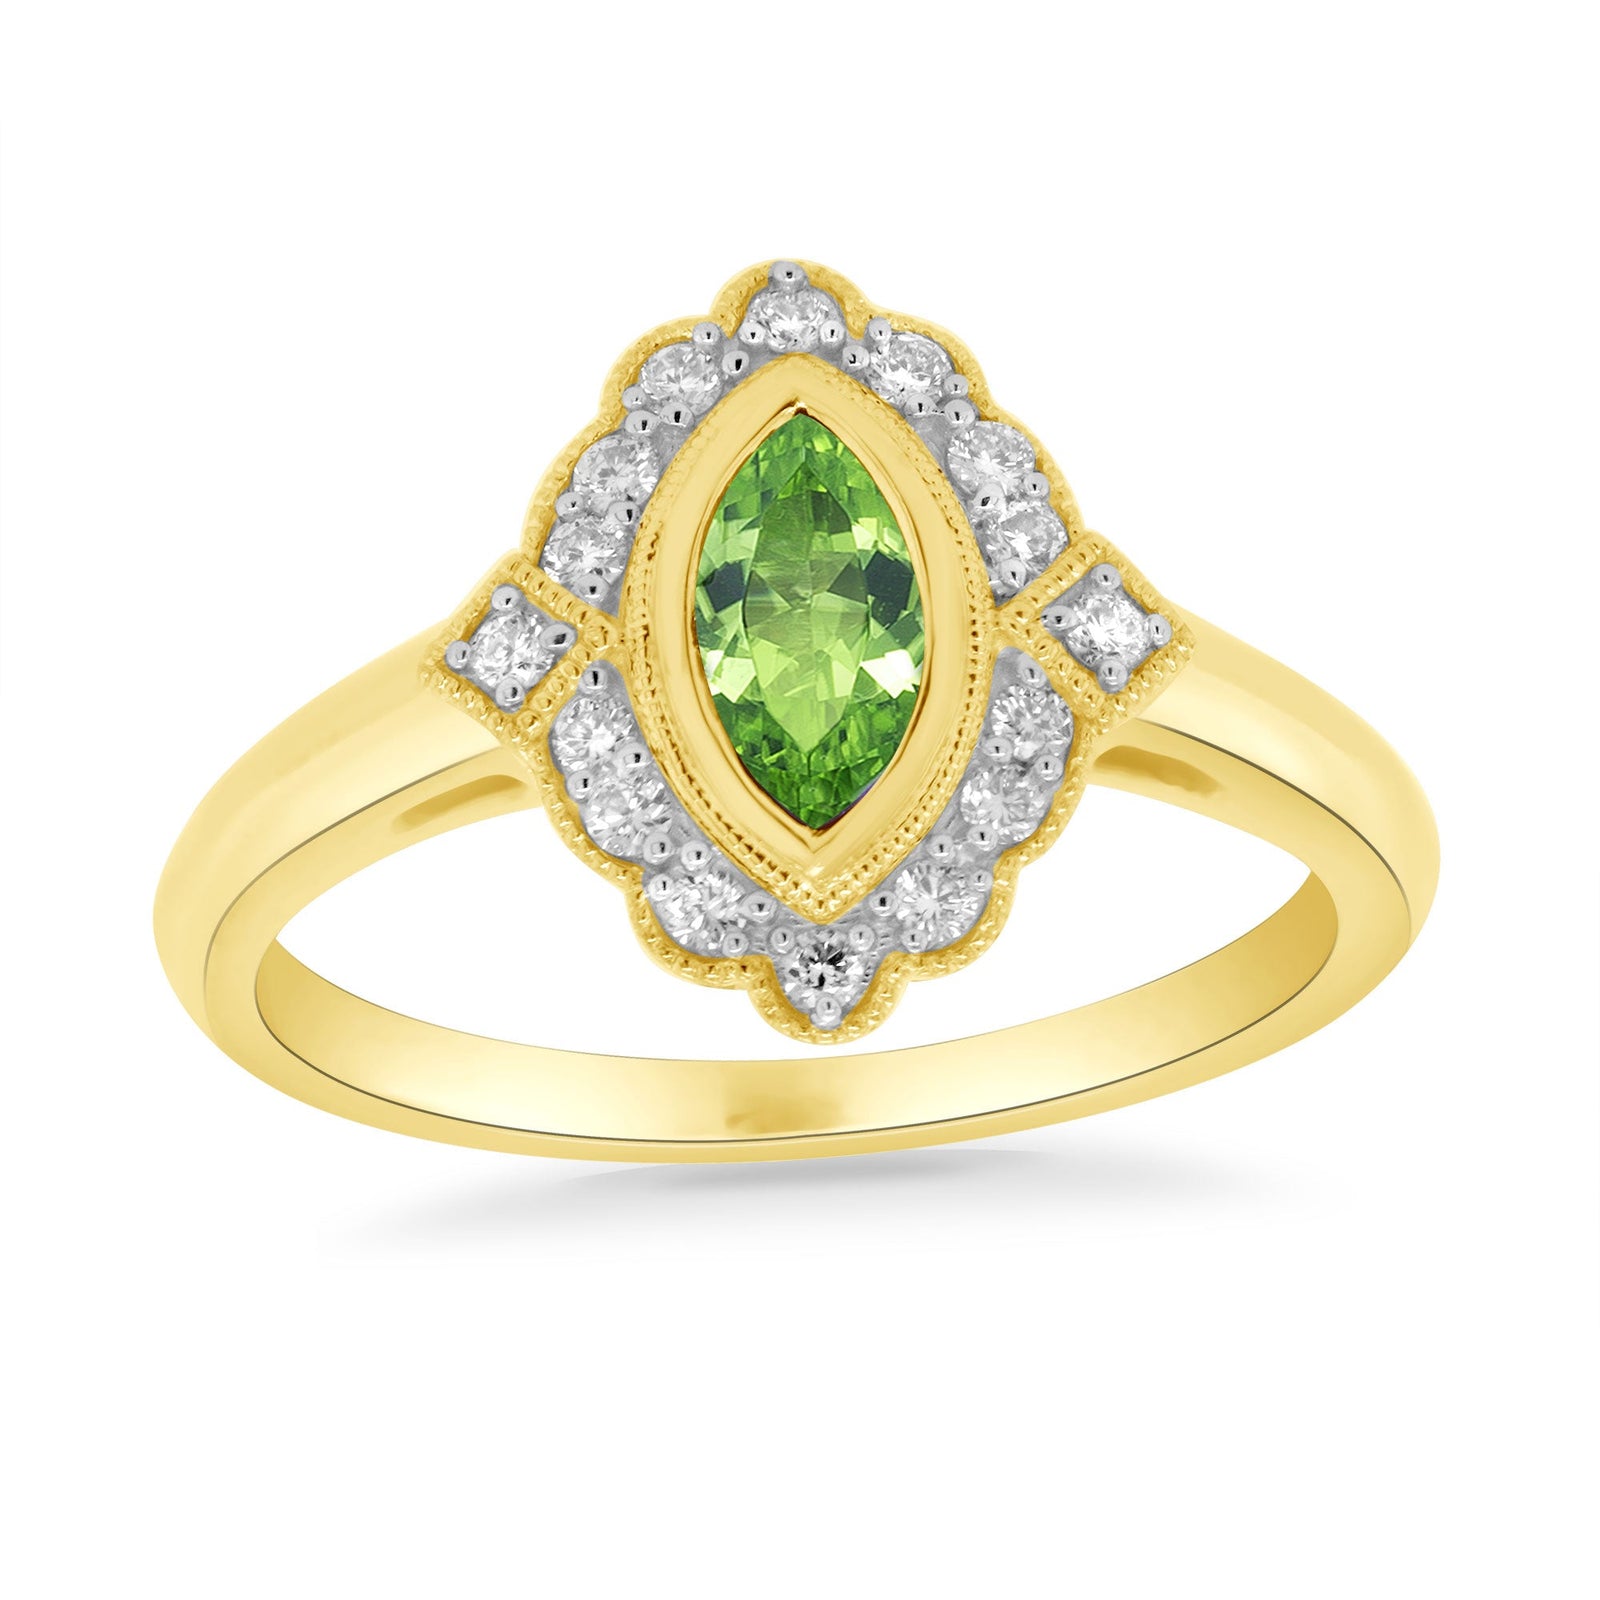 9ct gold 8x4mm marquise shape peridot & diamond cluster ring 0.15ct